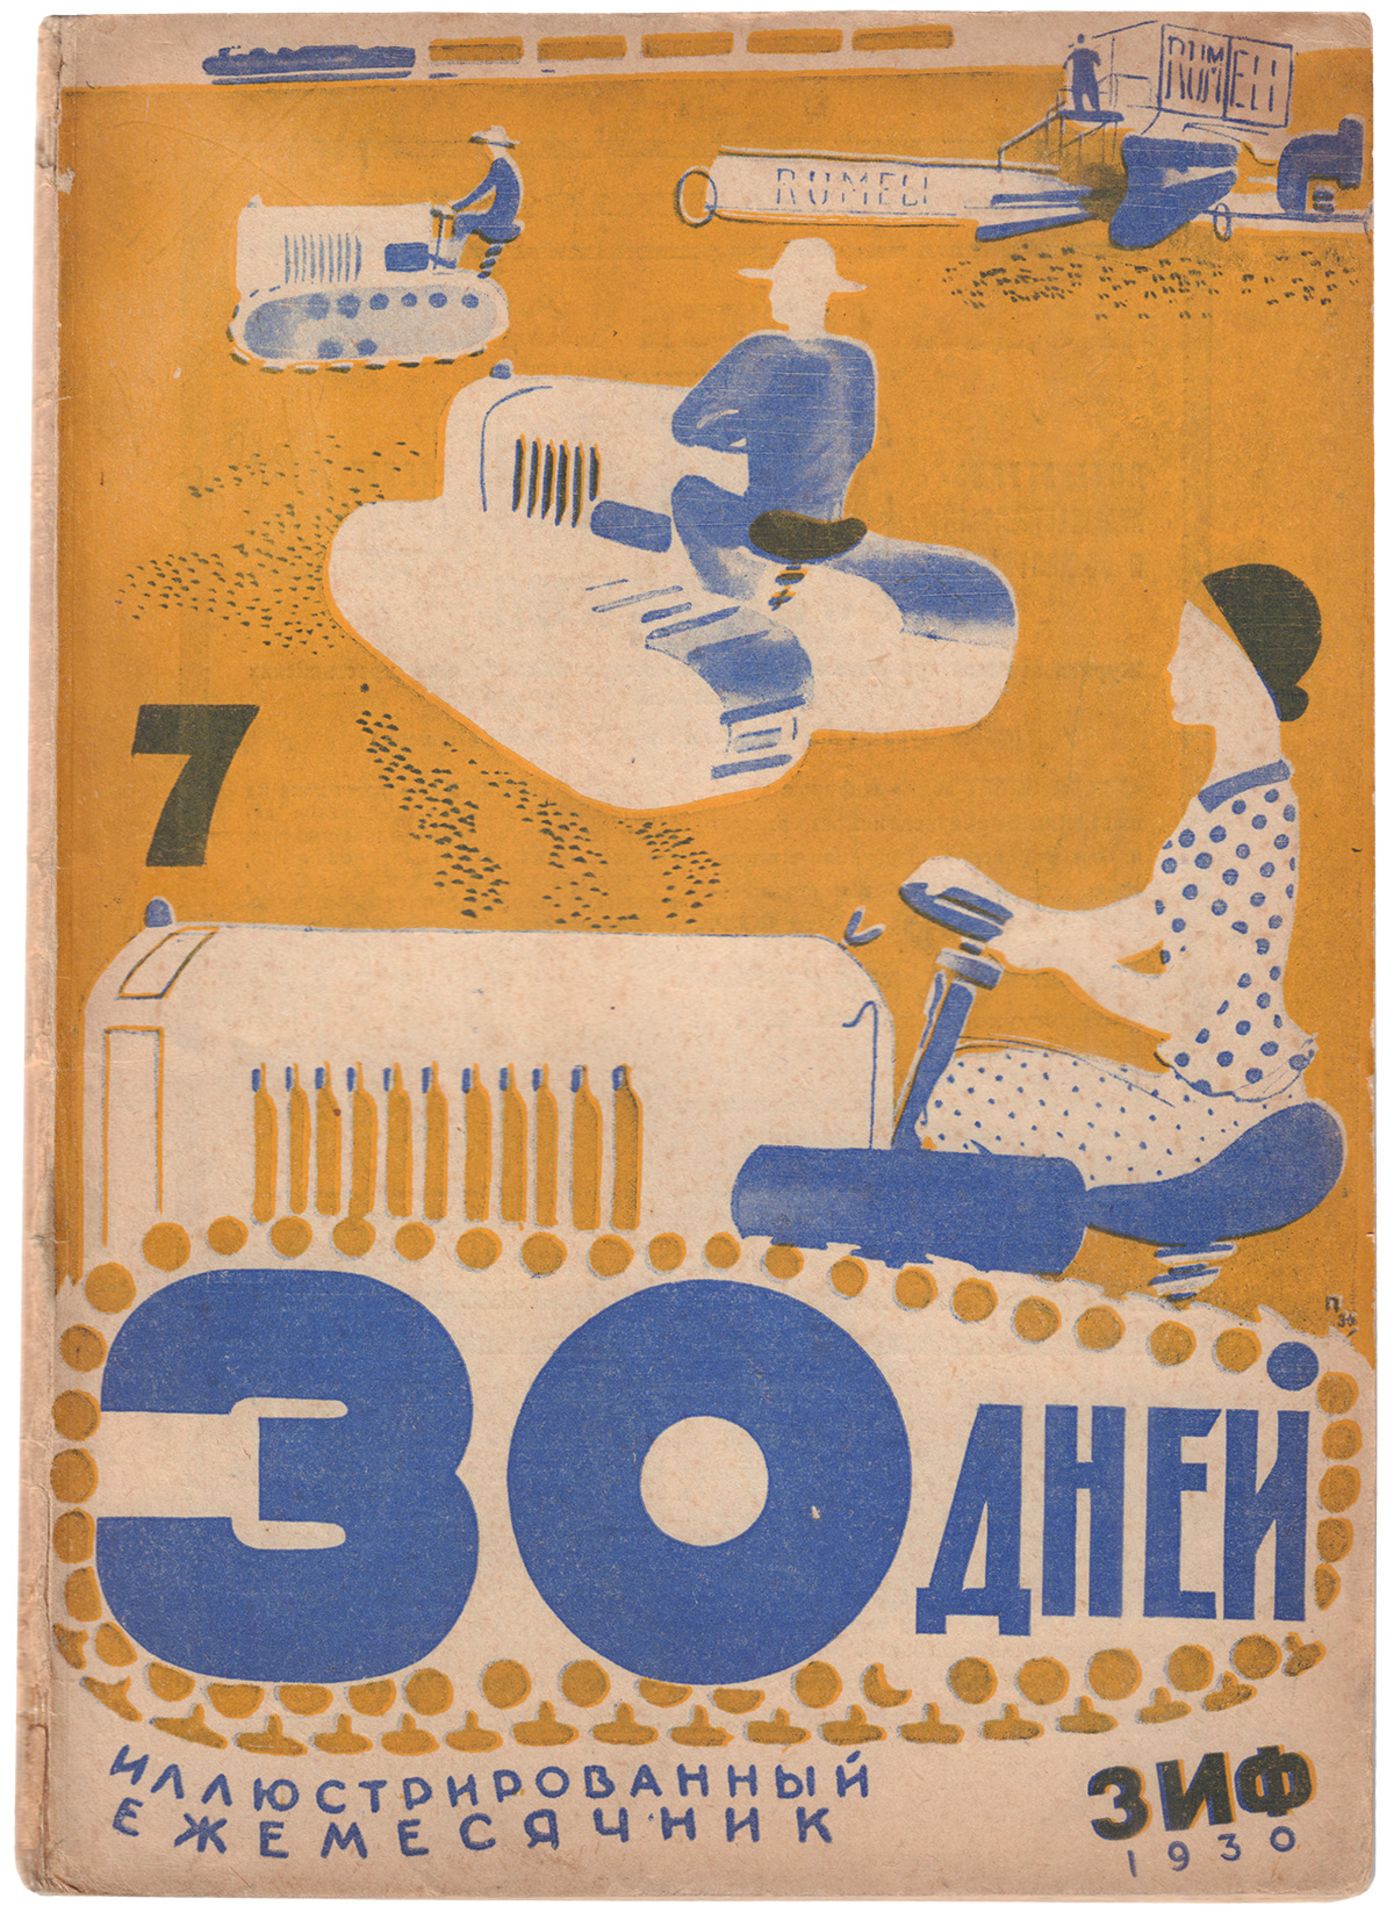 [Pimenov, Yu., cover. Constructivism]. 30 days: Illustrated Monthly Magazine. No. 7. - Moscow: ZIF,